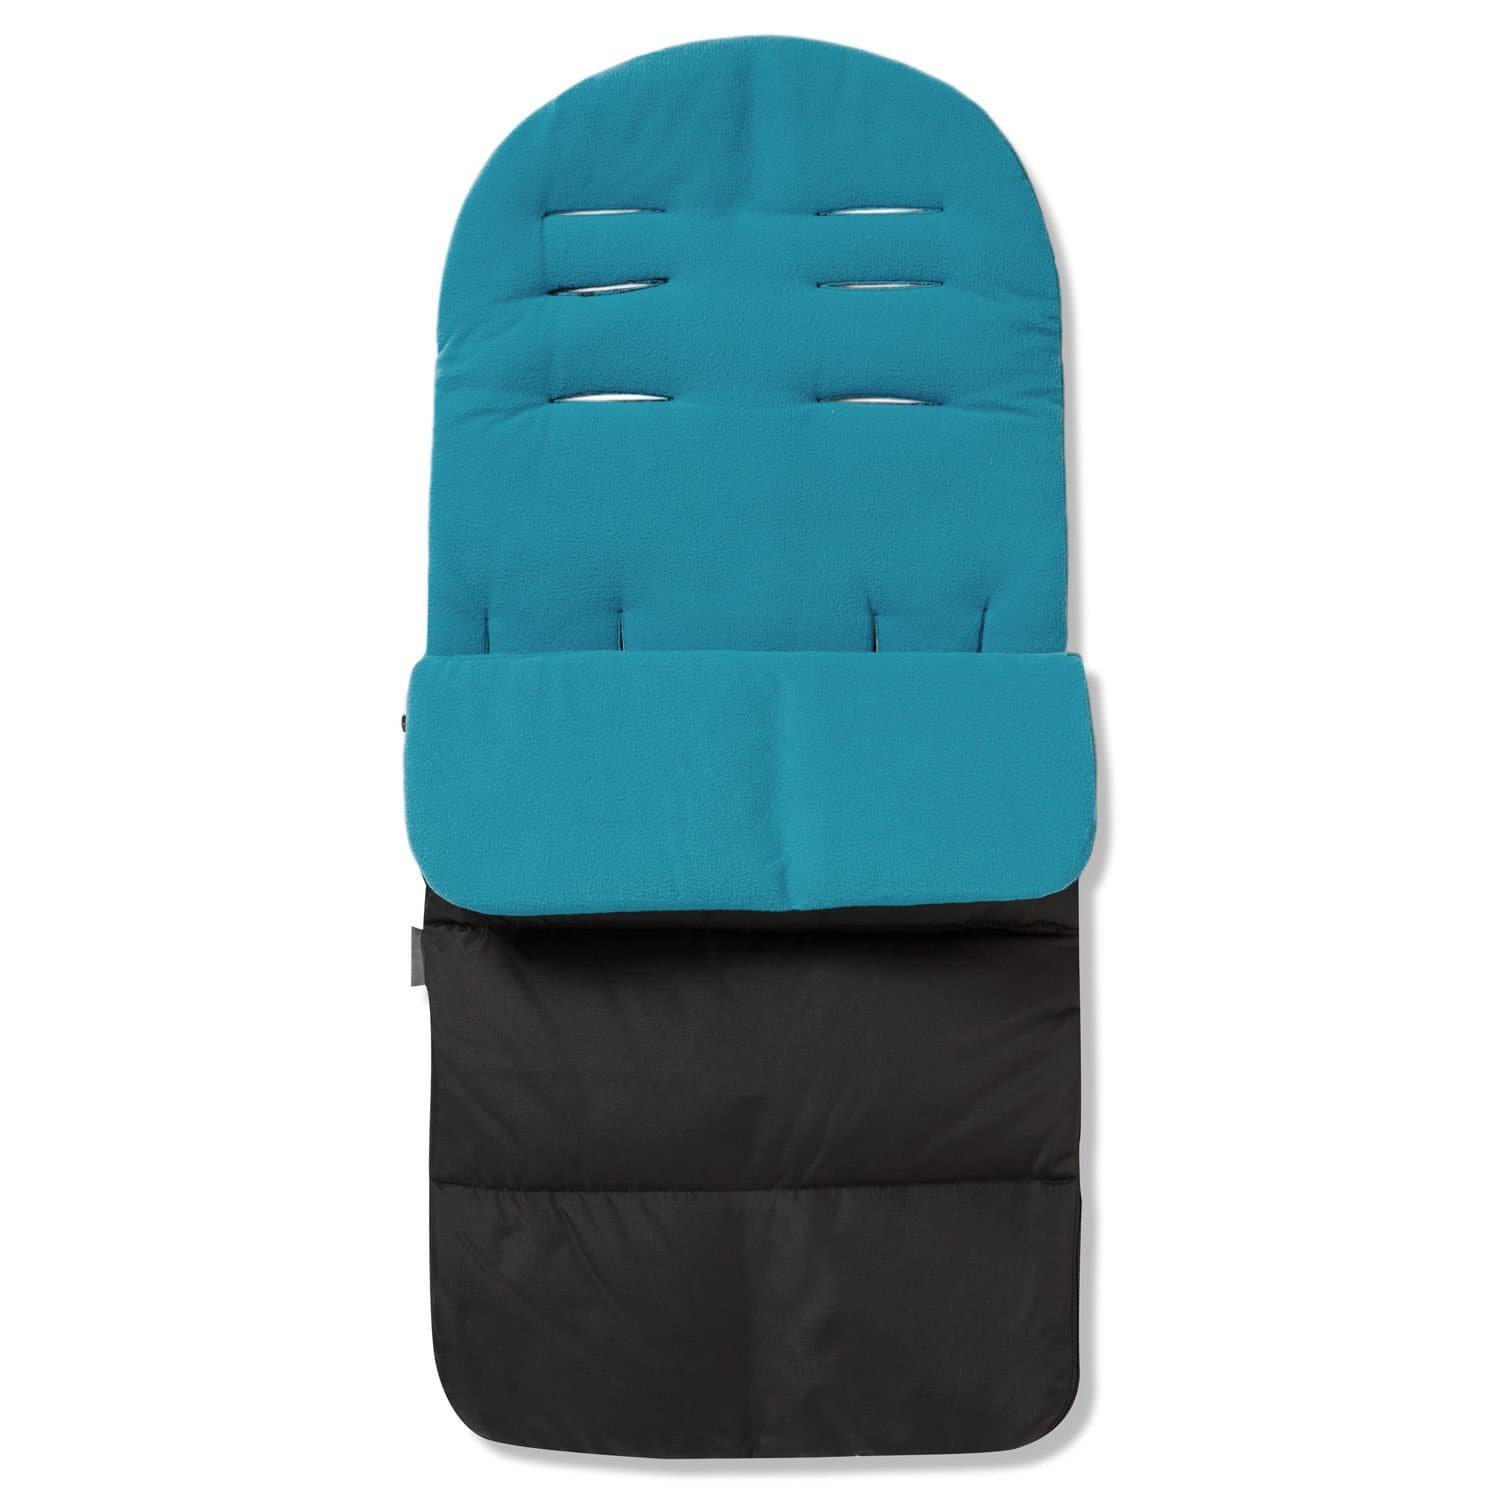 Premium Footmuff / Cosy Toes Compatible with Hybrid - Ocean Blue / Fits All Models | For Your Little One